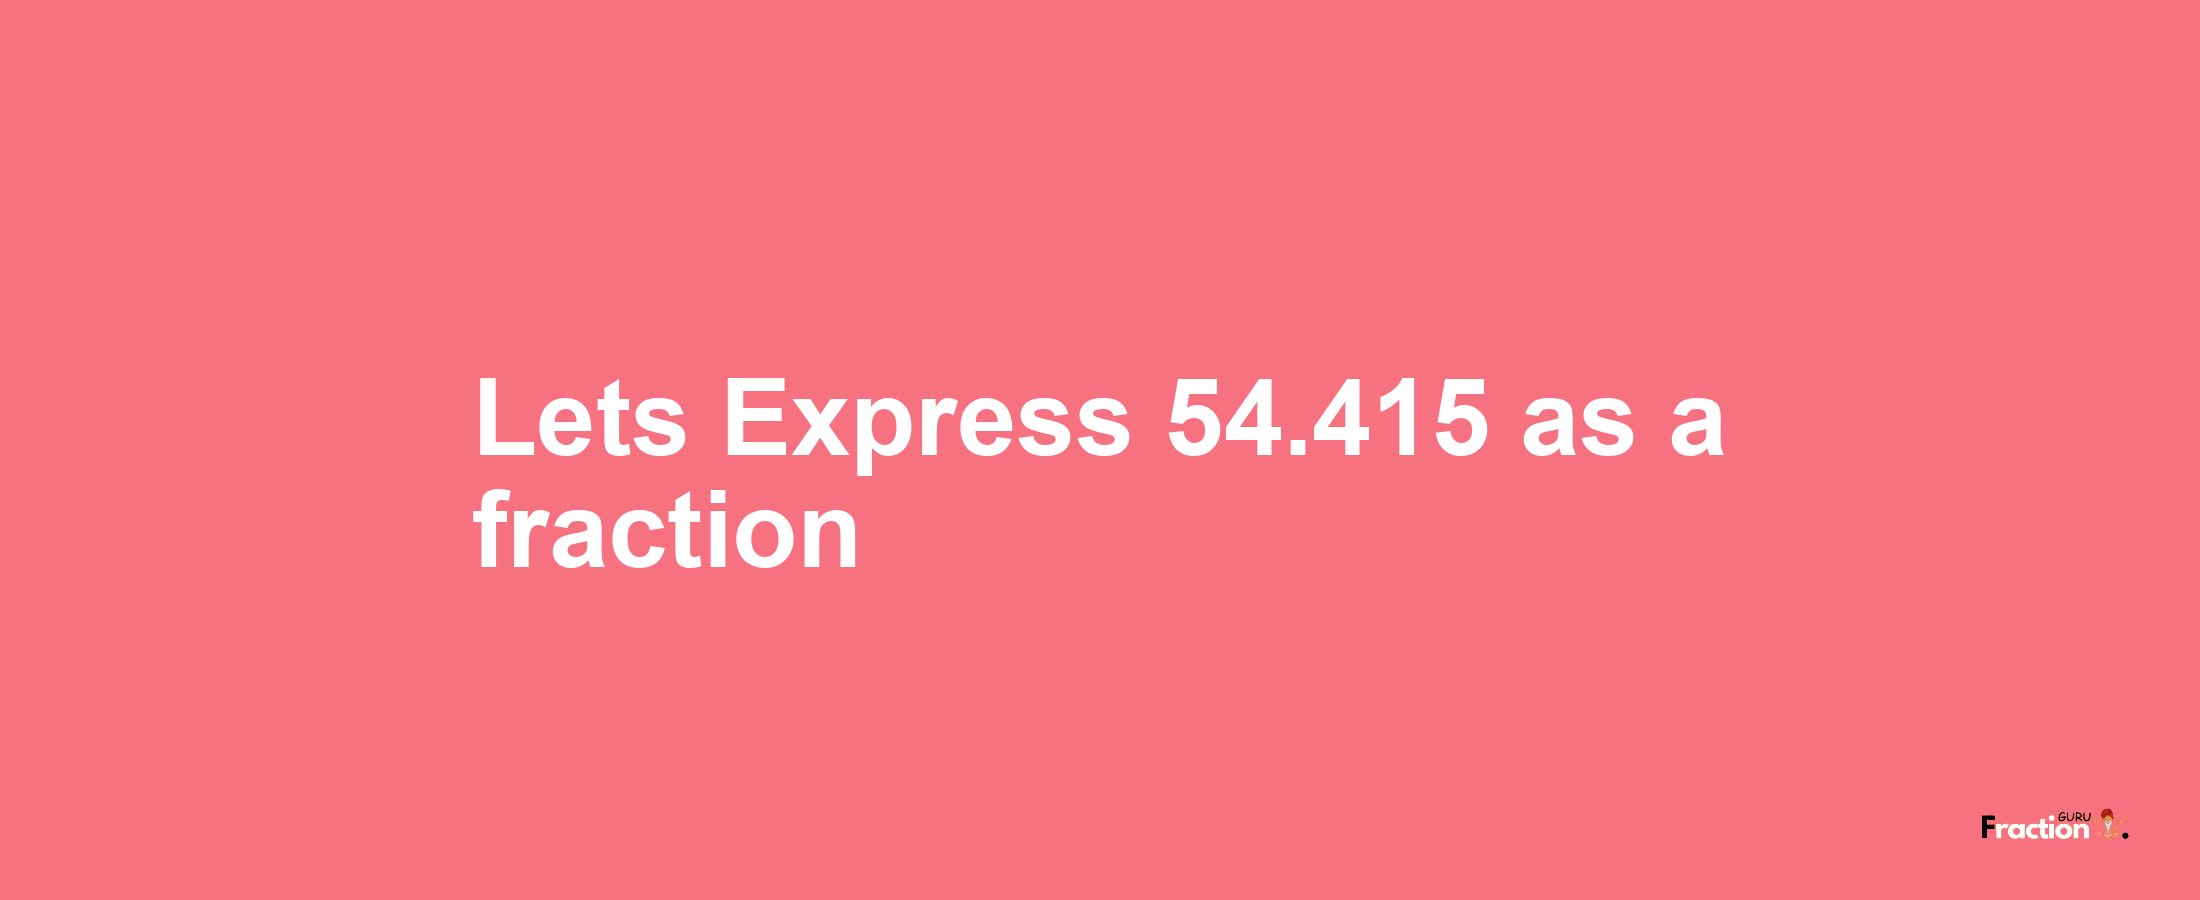 Lets Express 54.415 as afraction